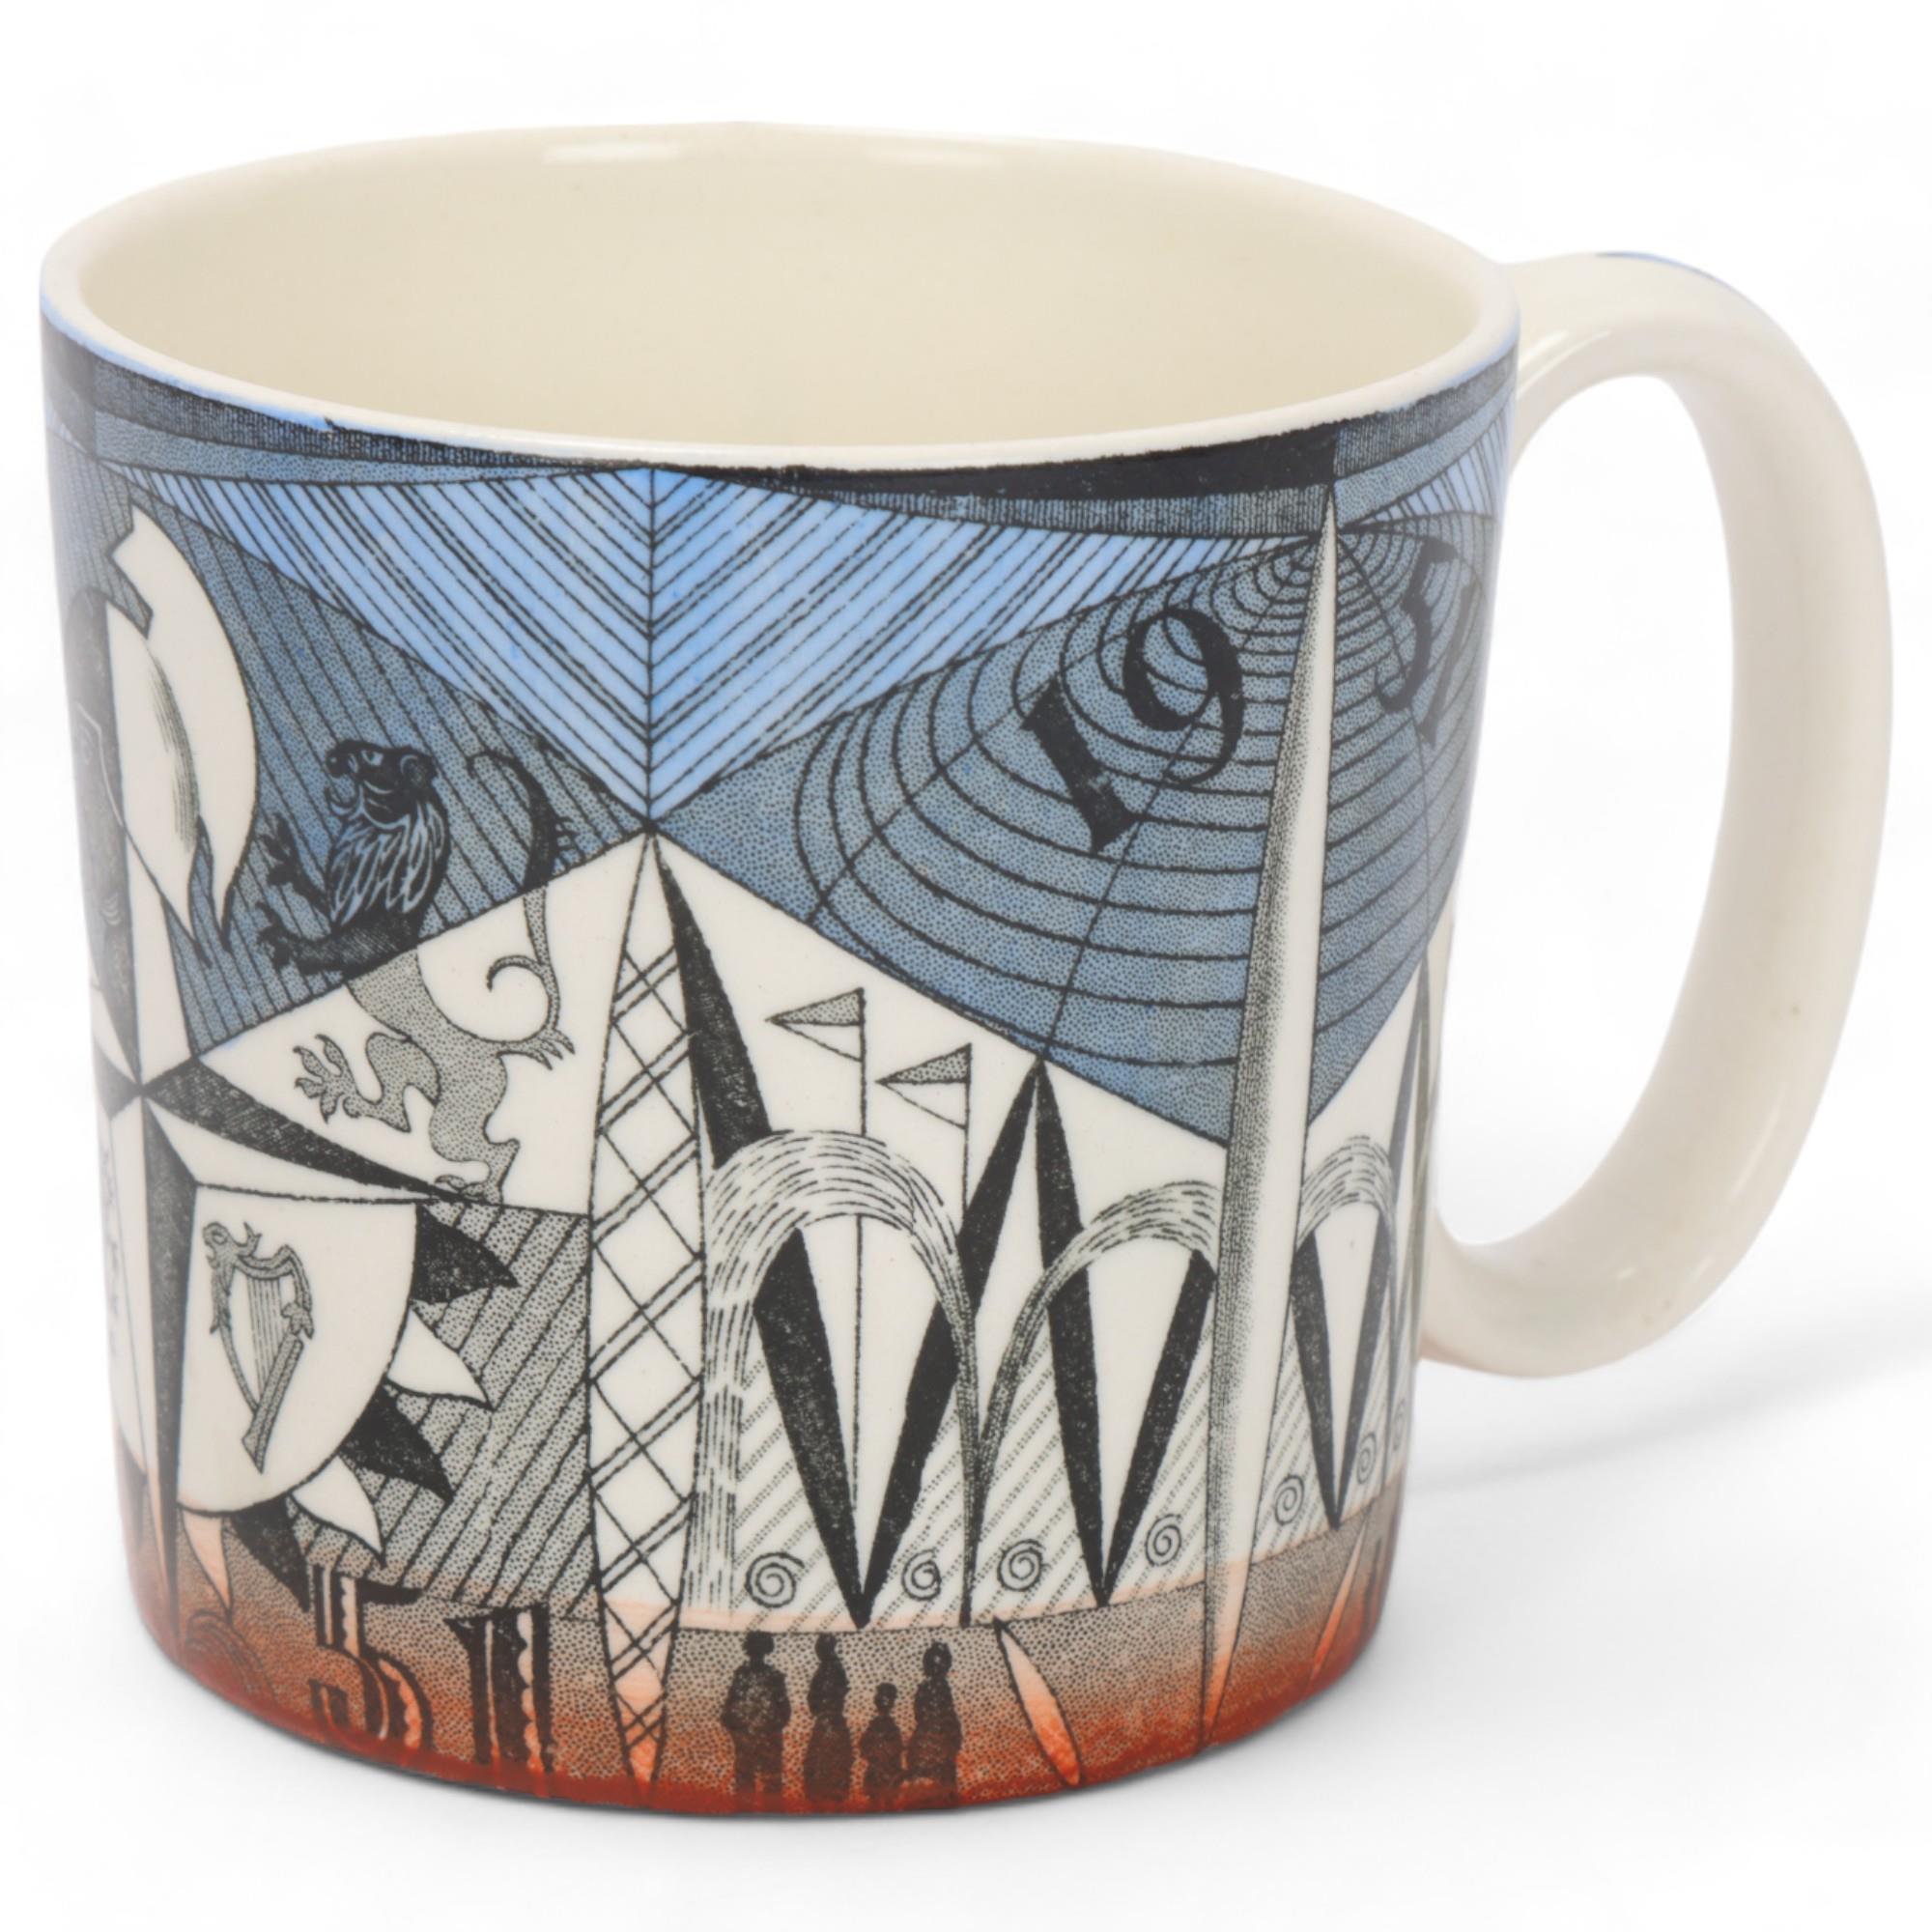 NORMAN MAKINSON (1921-2010) for Wedgwood, a 1951 'Festival of Britain' mug, printed and painted with